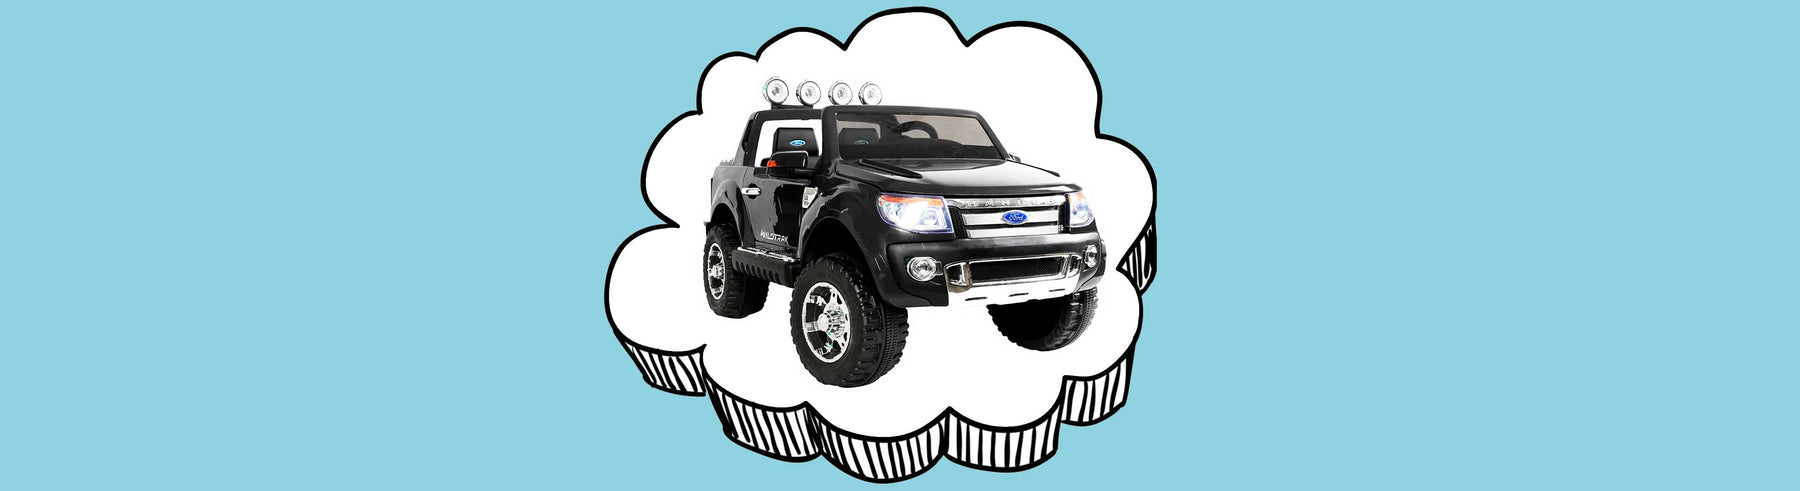 Ford Licensed F150 Ranger Deluxe Kids Ride On Car with Remote Control